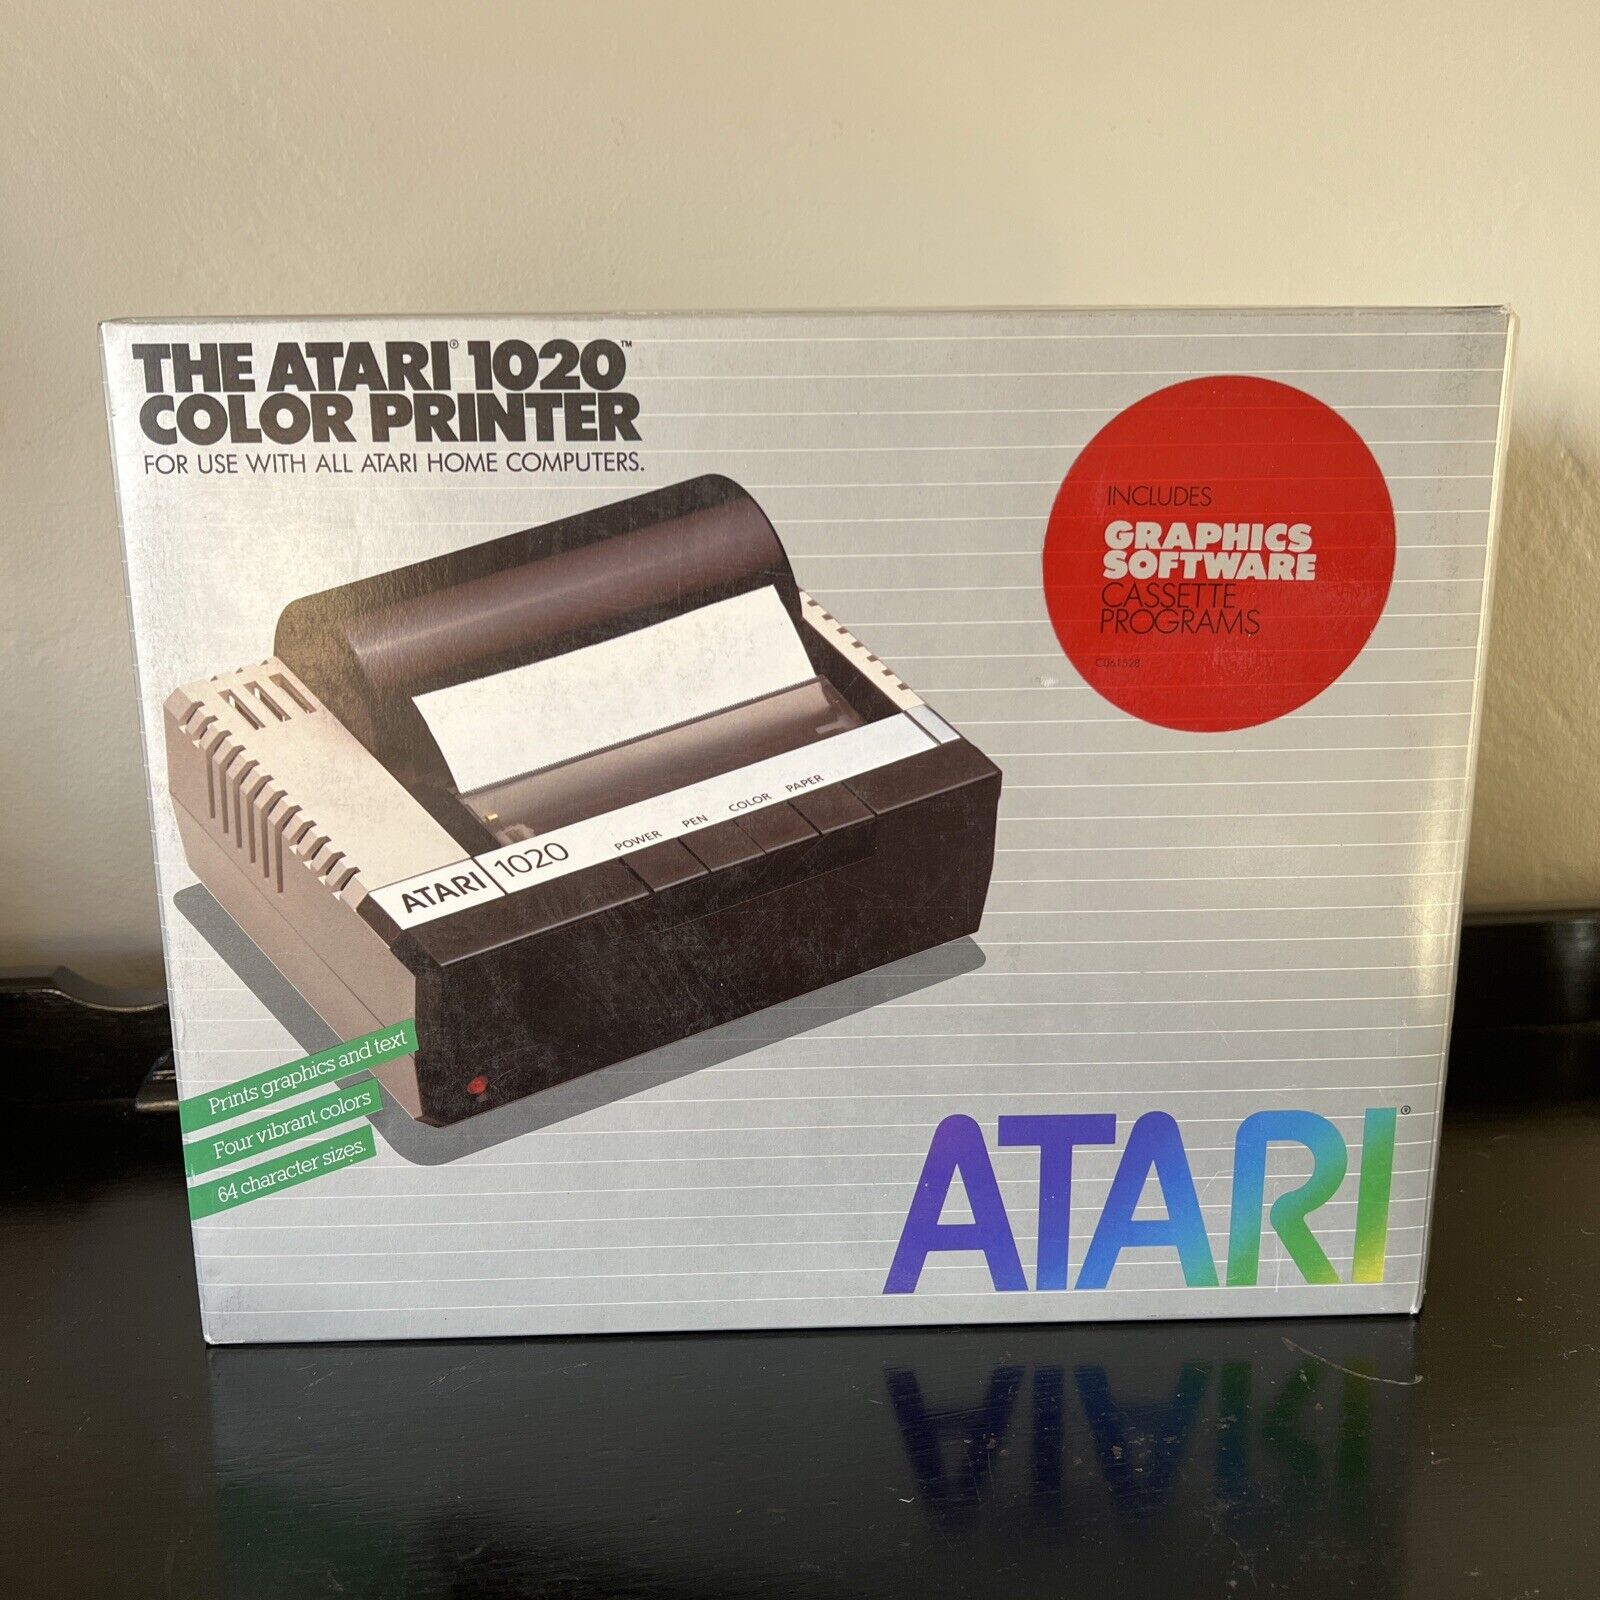 Atari 1020 Color Printer, complete in box (manuals, software, wires). Works.